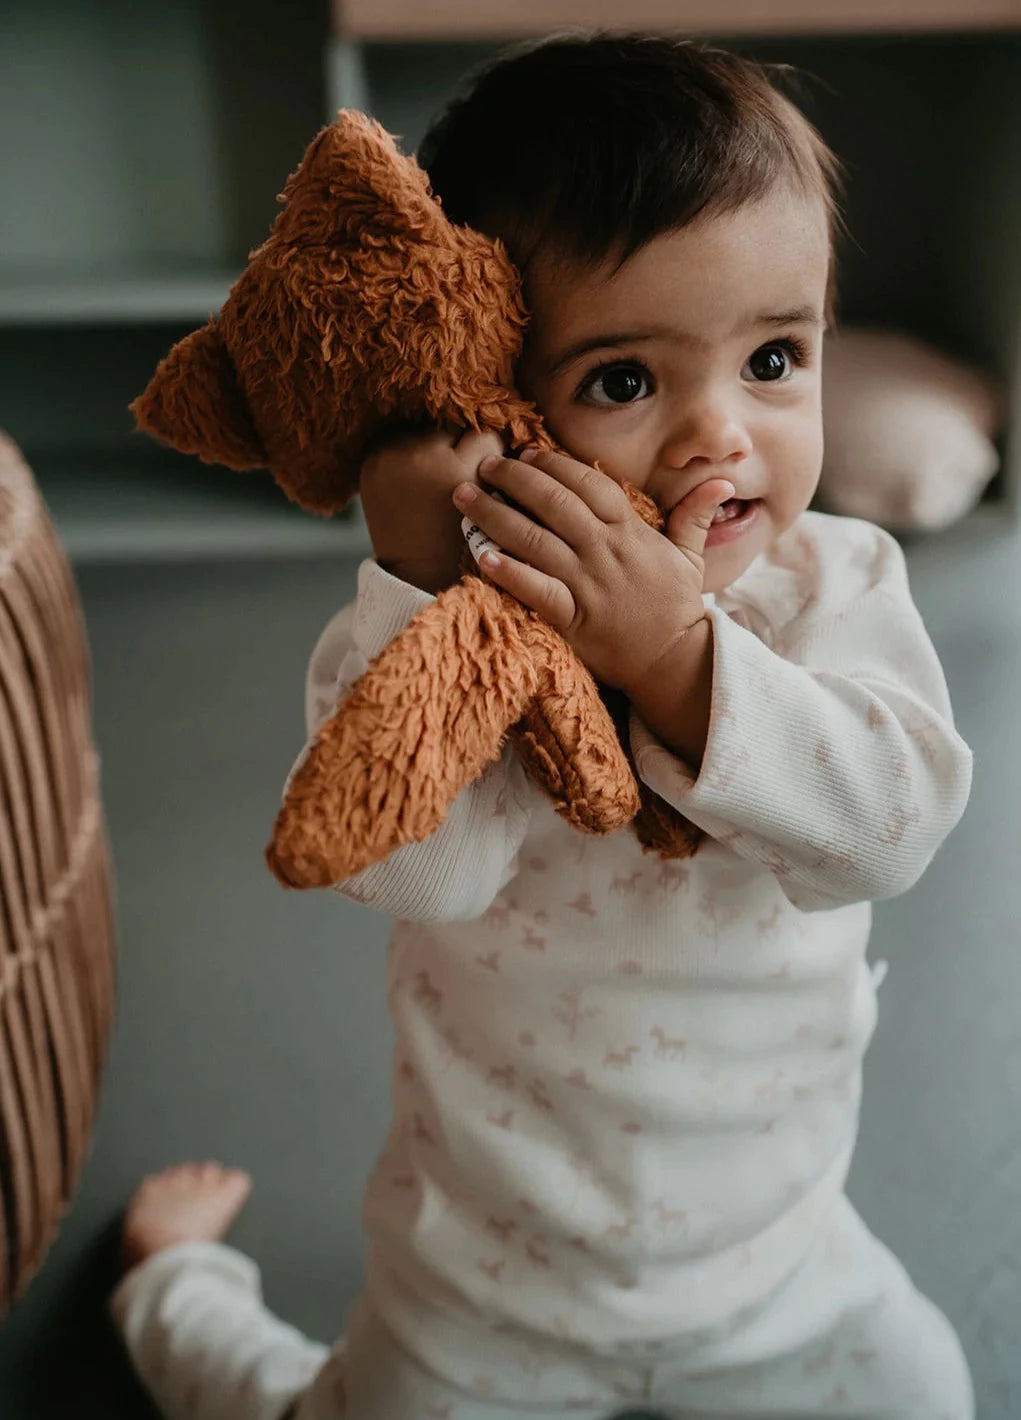 This picture shows a toddler wearing the organic cotton pyjama set from Snoozebaby